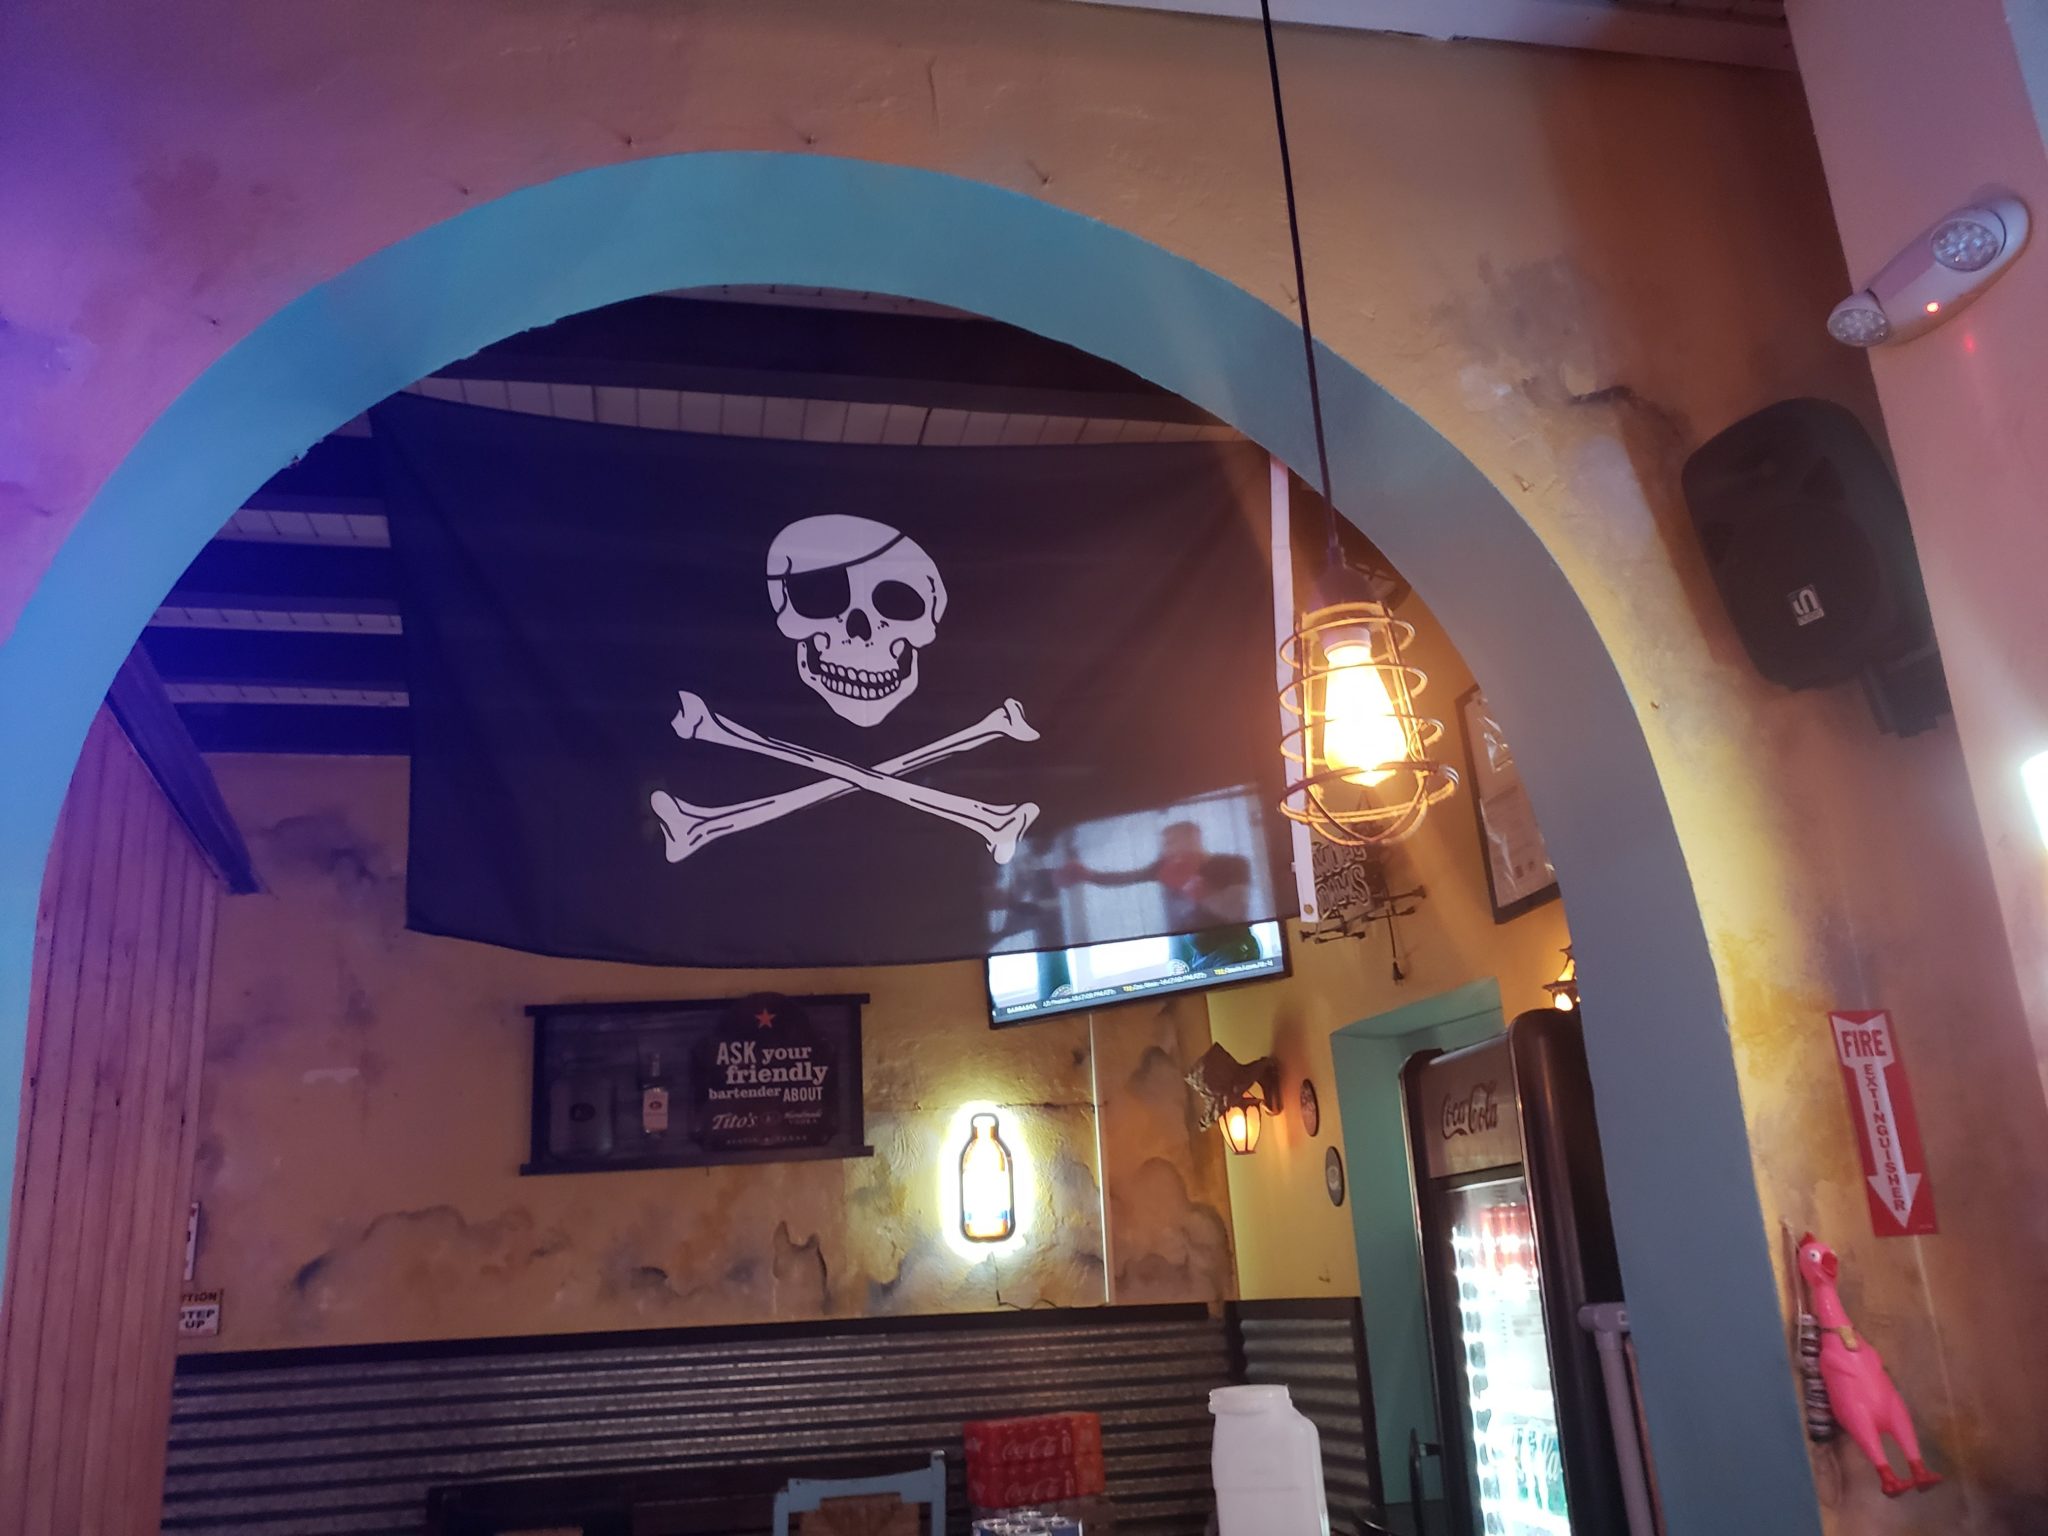 a flag with a skull and crossbones on it